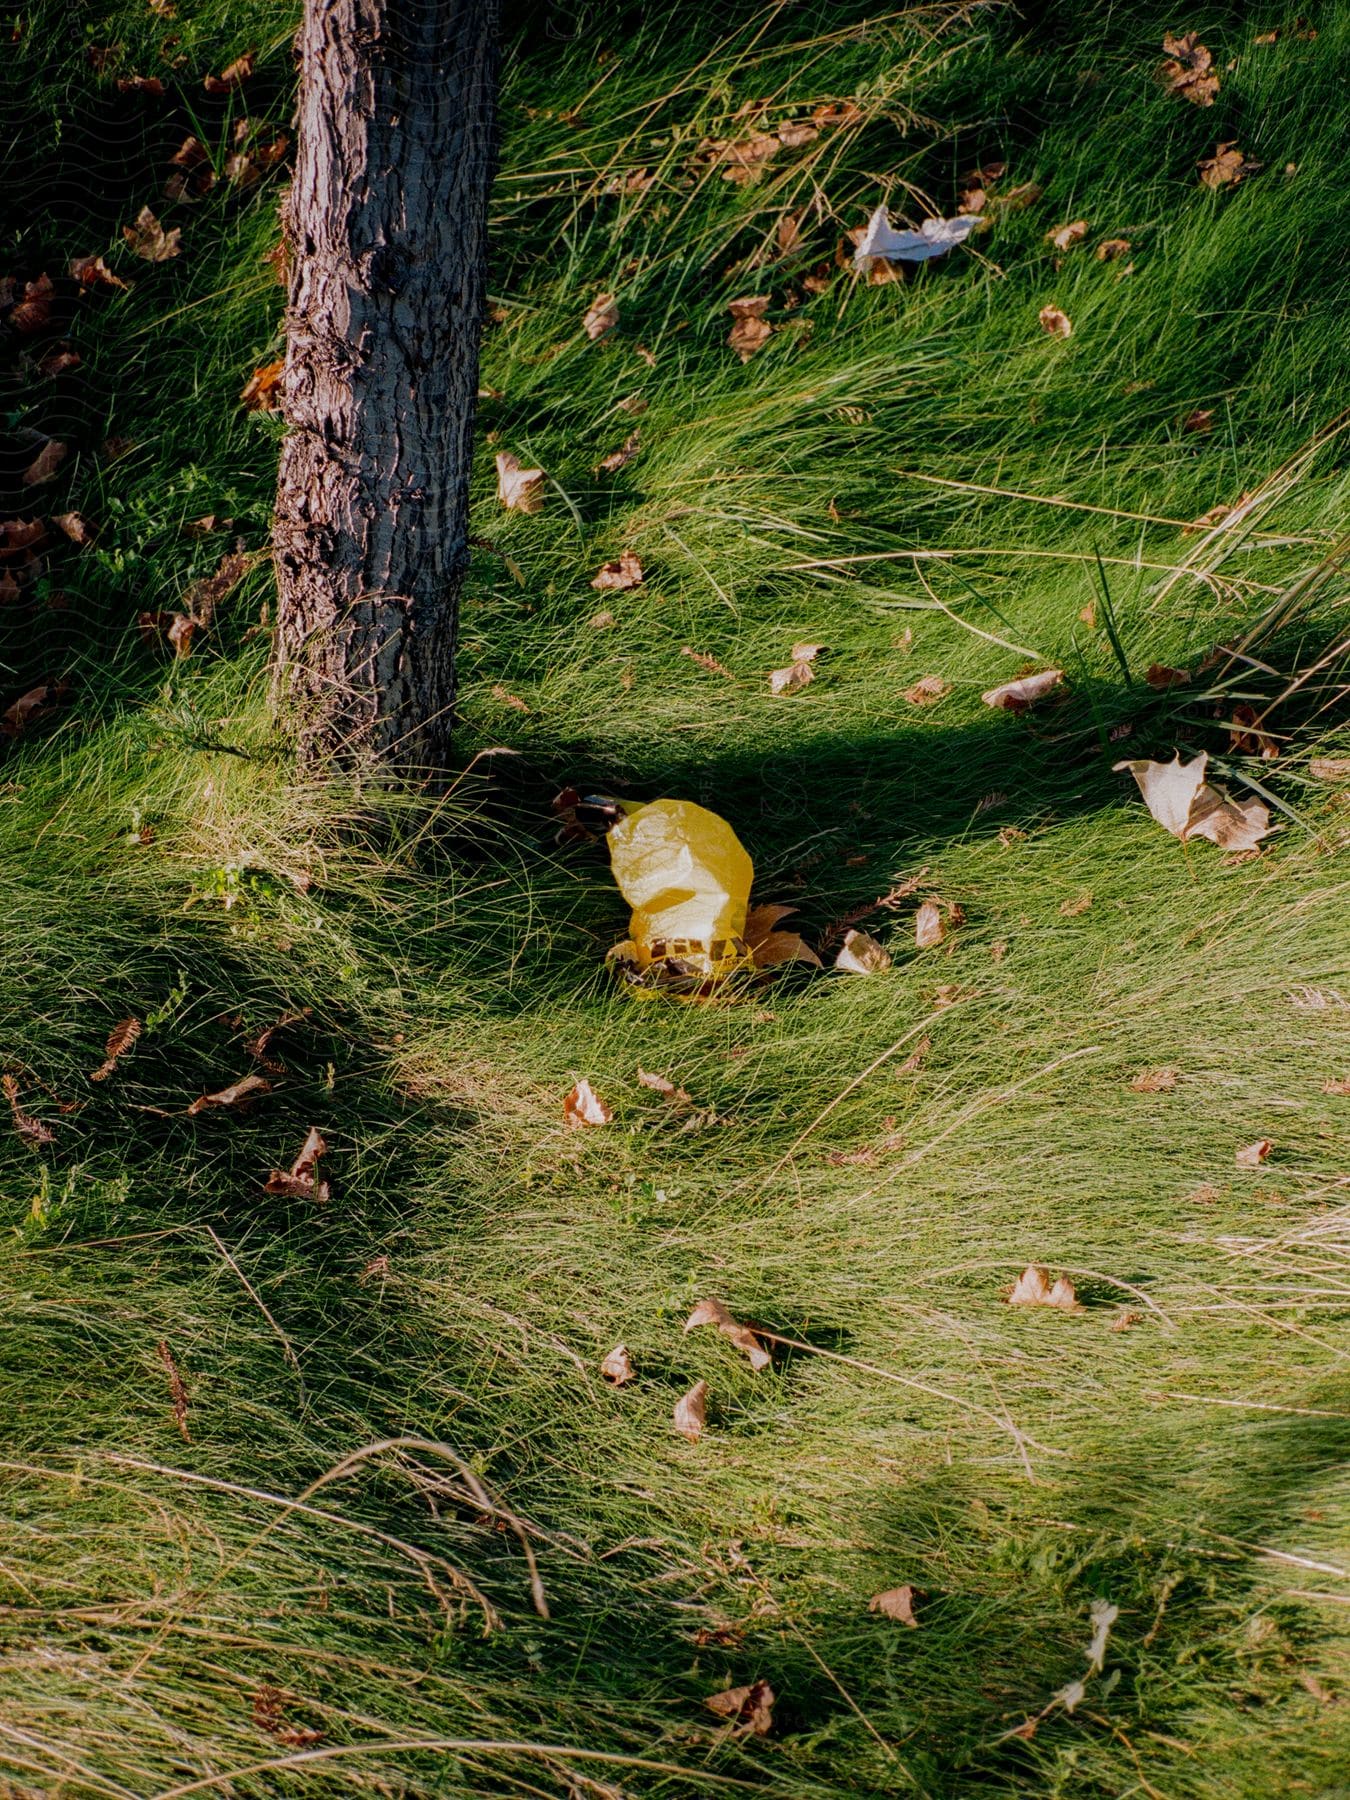 Yellow plastic bag rests on green grass scattered leaves tall tree nearby